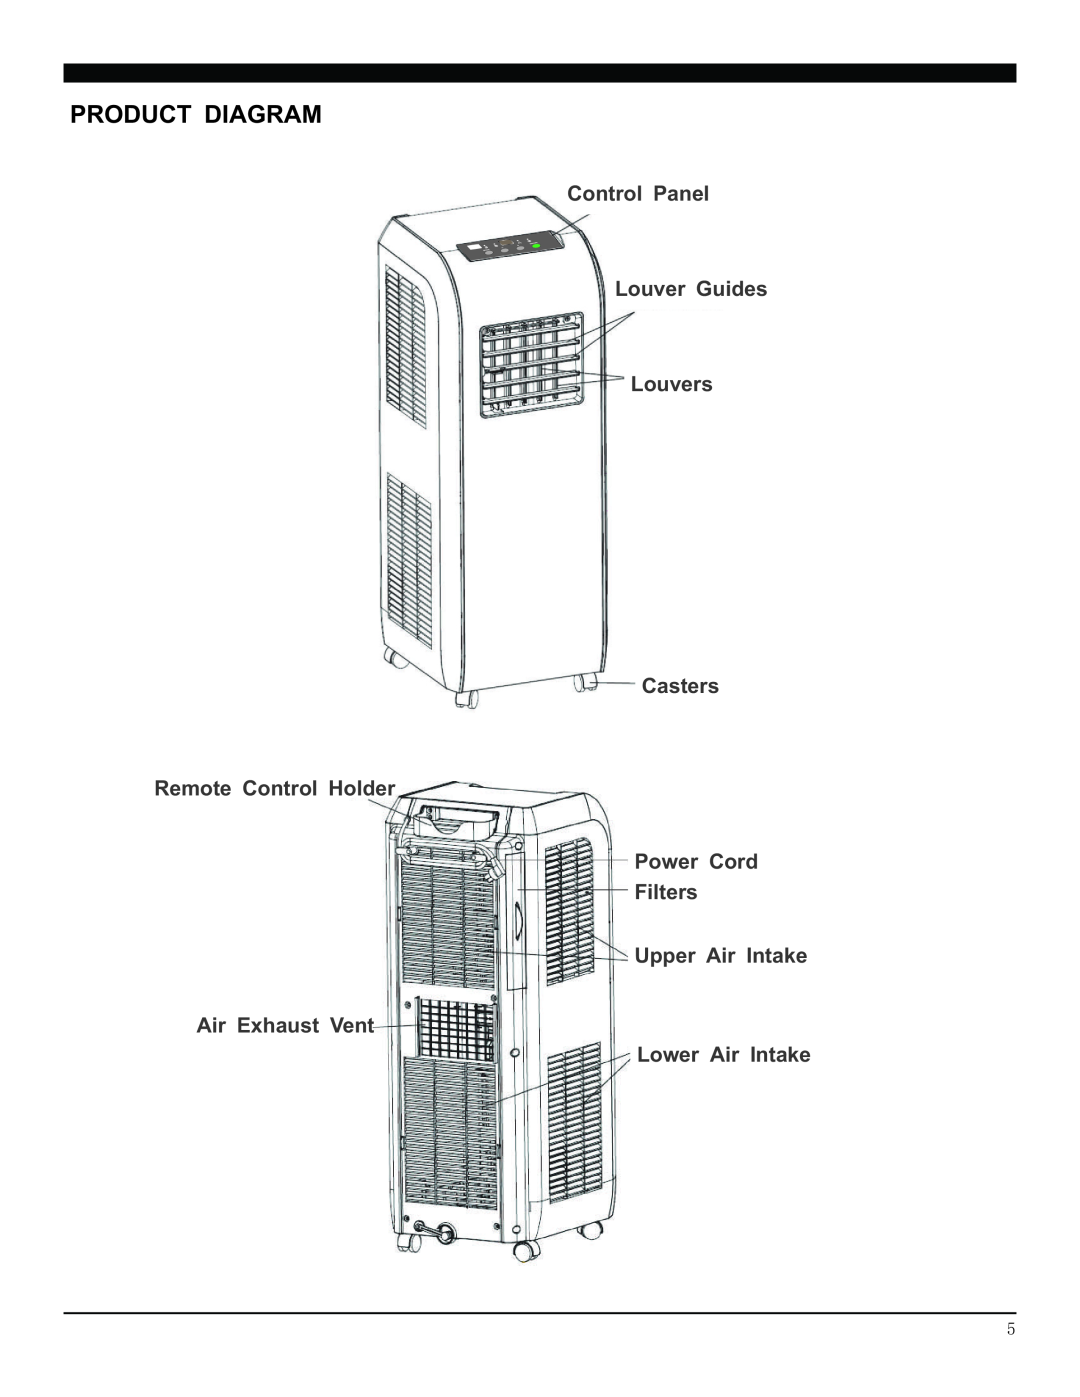 Soleus Air SG-PAC-08E3 Product Diagram, Control Panel Louver Guides Louvers Casters, Upper Air Intake Air Exhaust Vent 